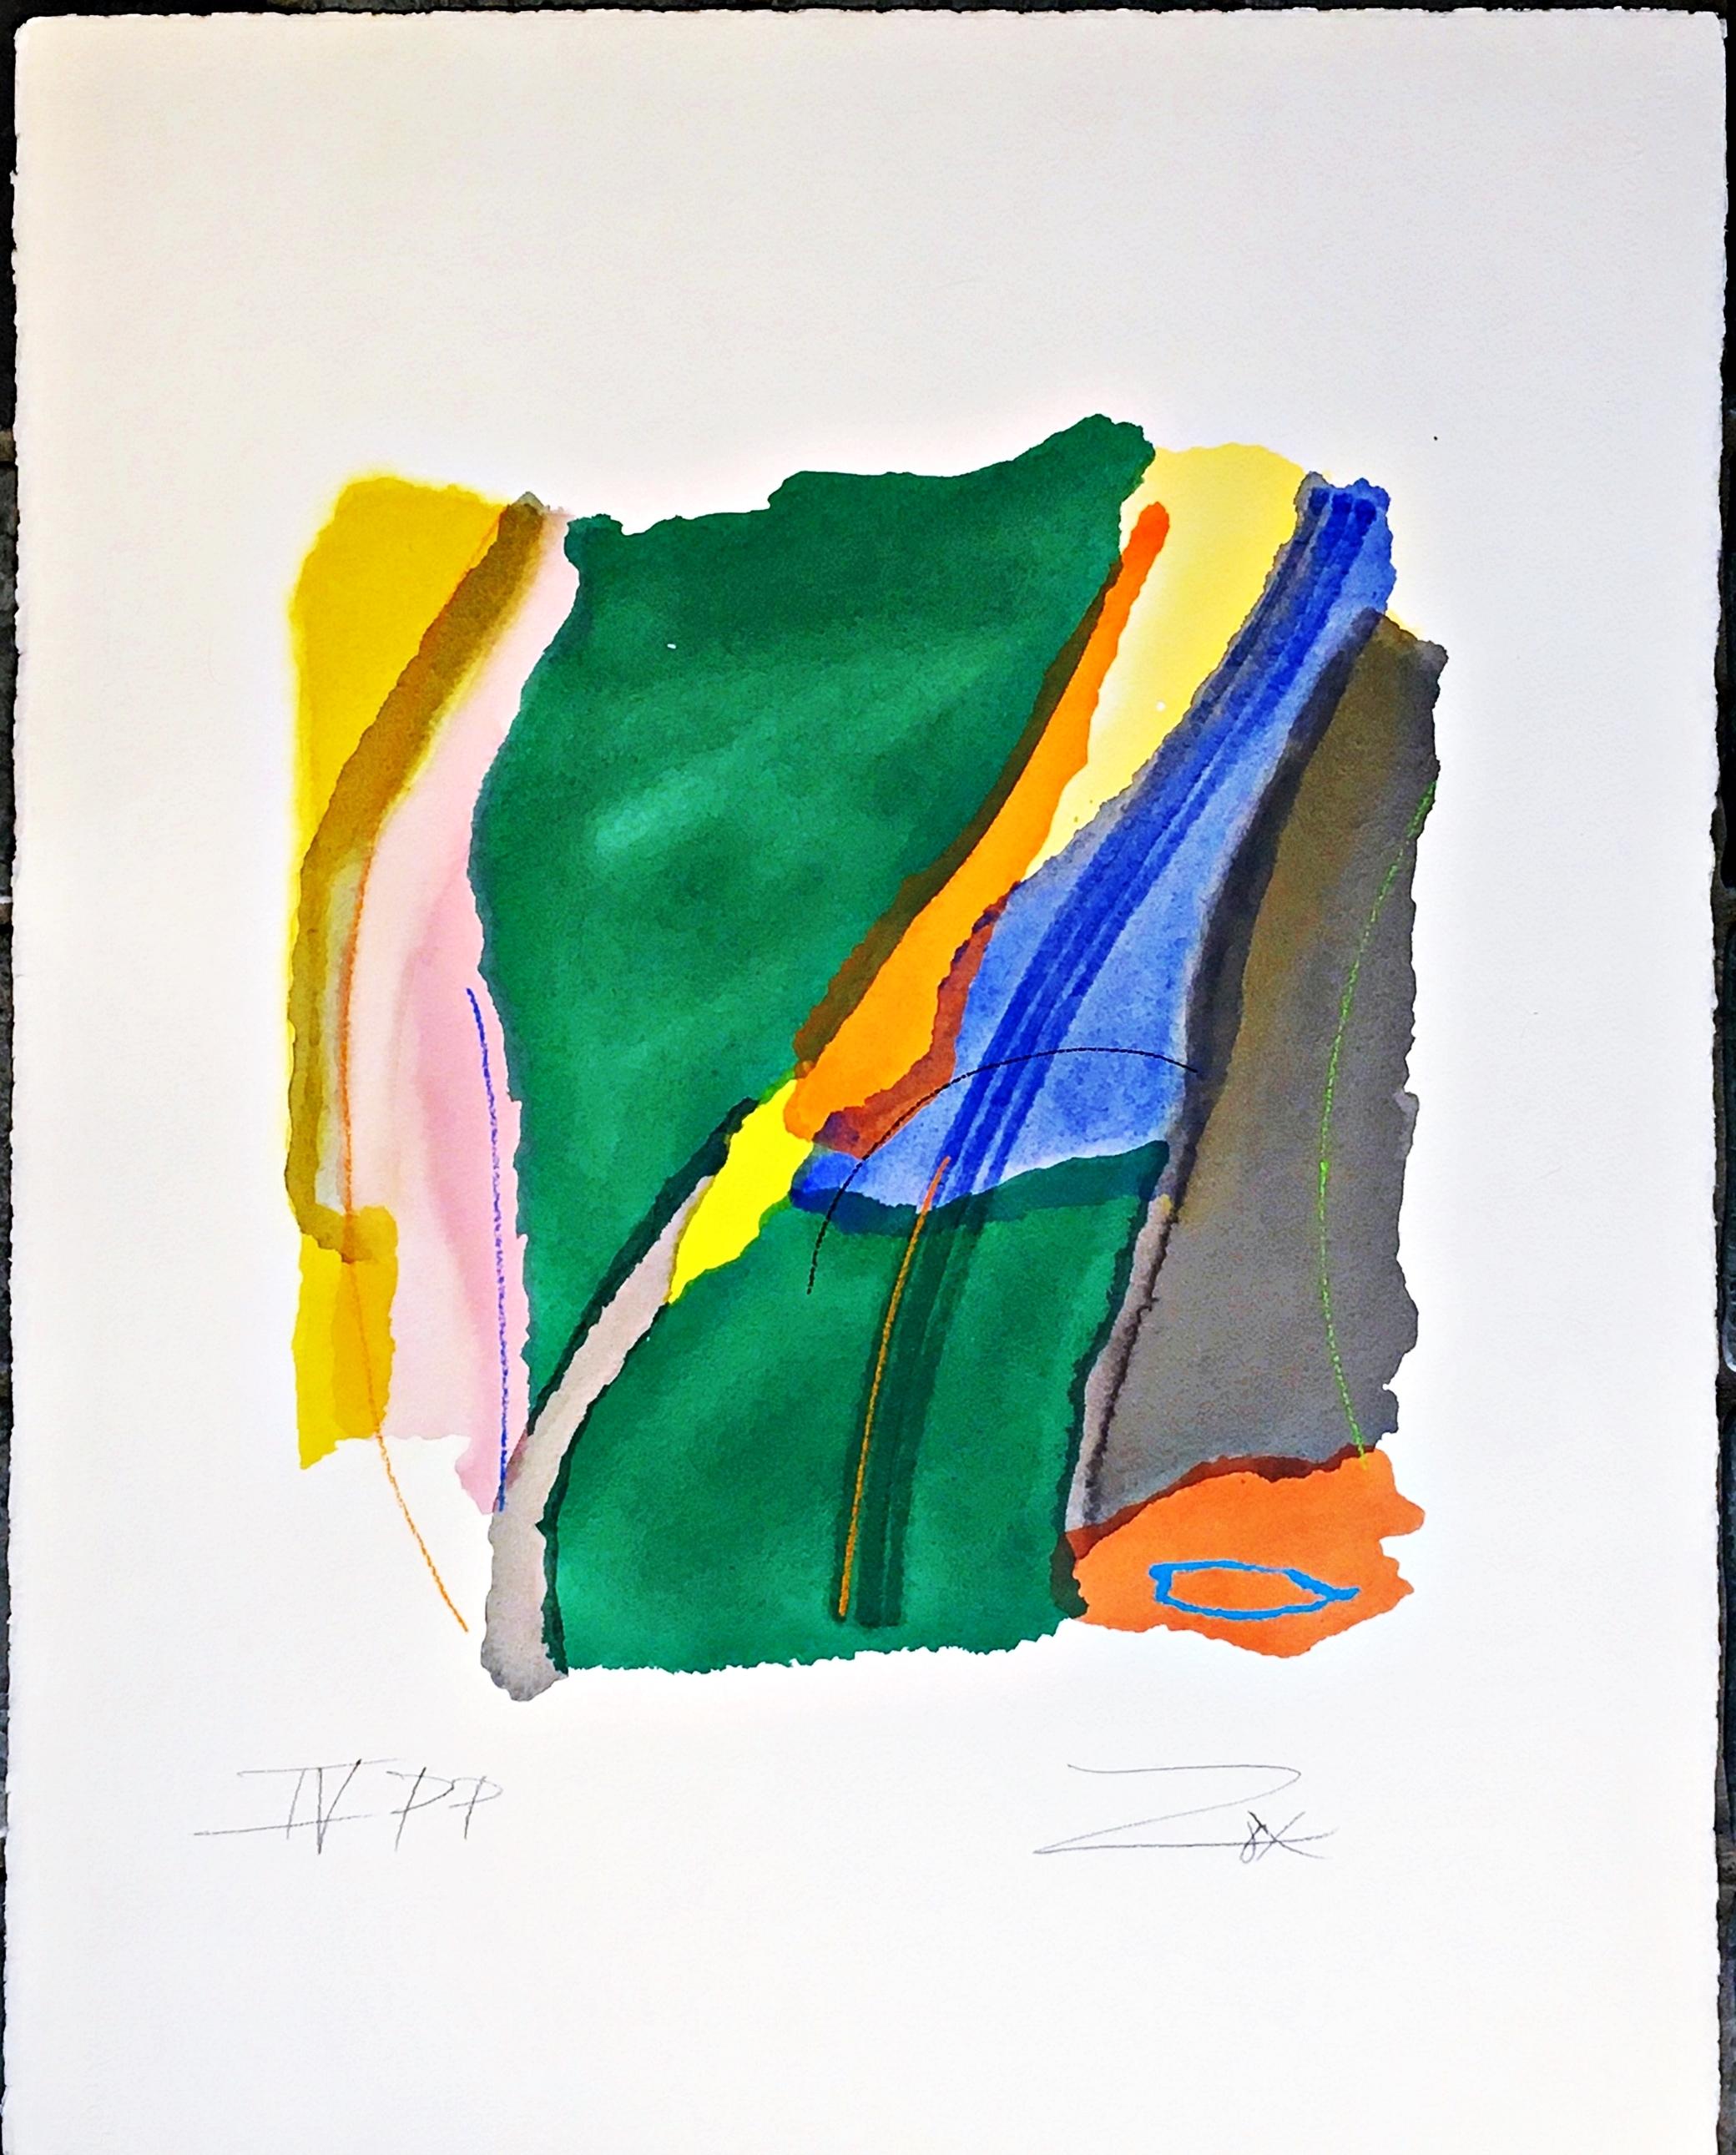 Larry Zox
Untitled IV, ca. 1979
Pochoir on Arches Paper with Deckled Edges. Hand signed and numbered PPIV/4 by artist in pencil on the lower front.
28 1/2 × 22 1/2 inches
Unframed
This beautiful Larry Zox pochoir on Arches paper with deckled edges